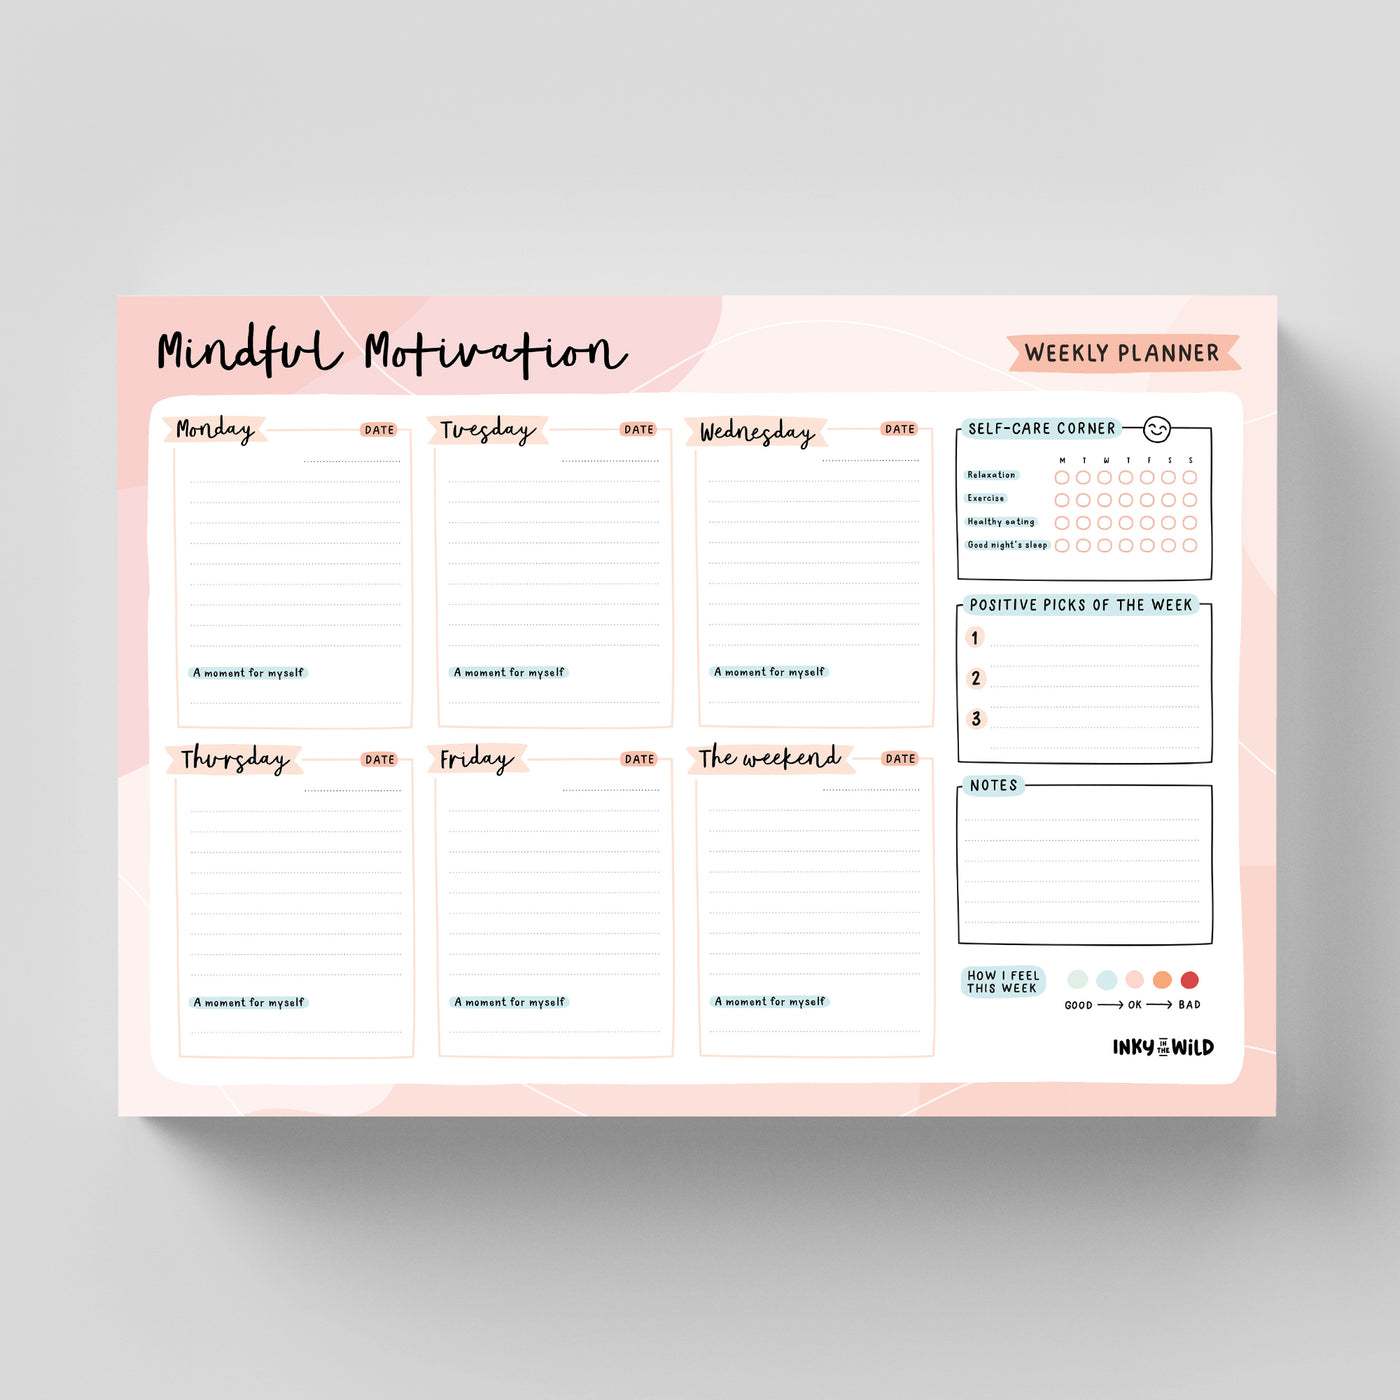 7 x Mindful Motivation Weekly Planners